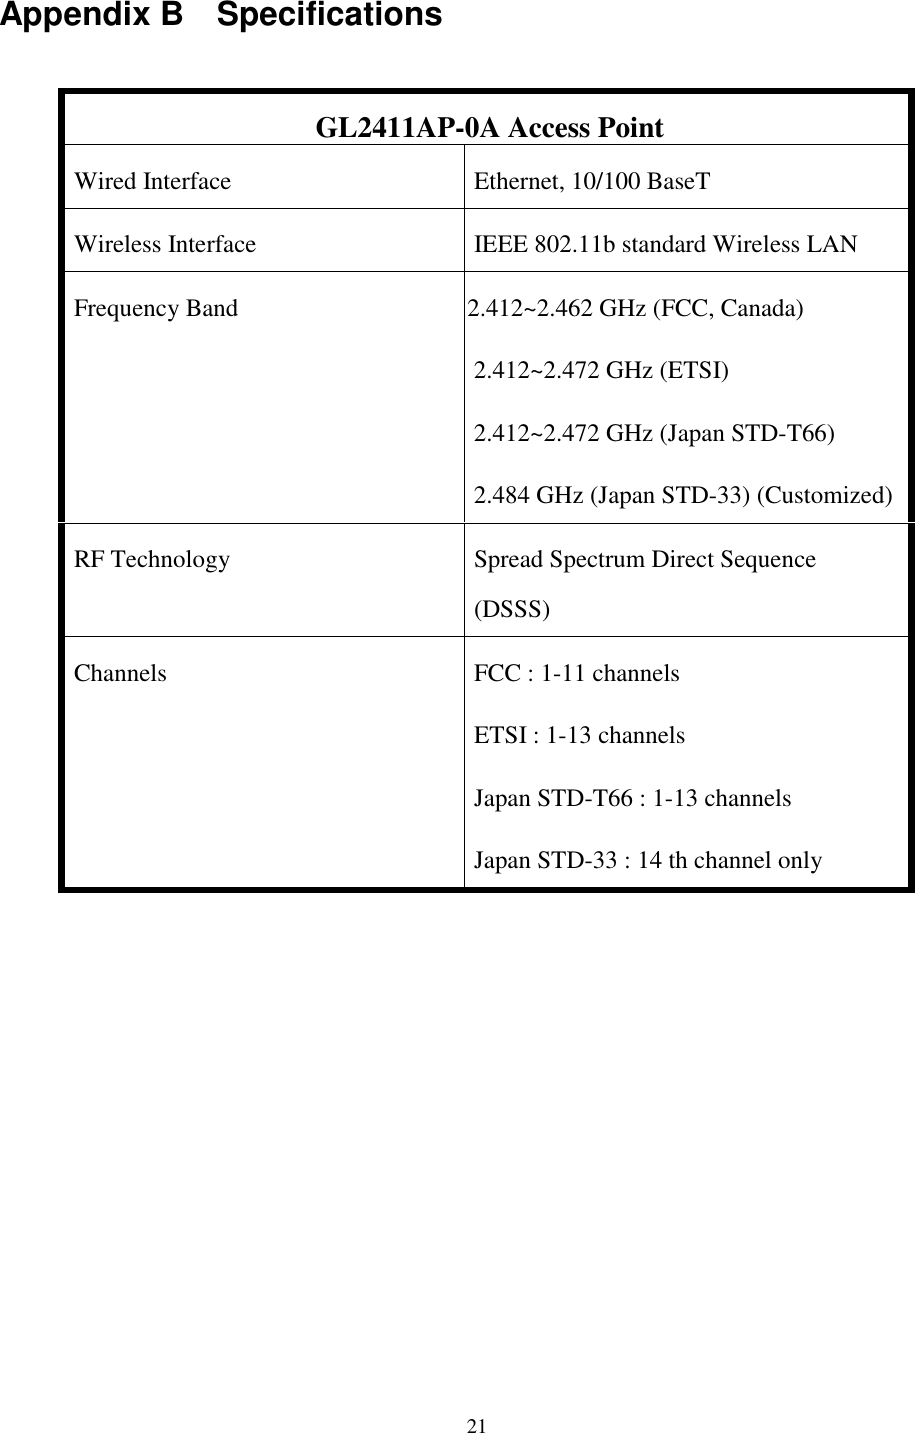 21Appendix B    SpecificationsGL2411AP-0A Access PointWired Interface Ethernet, 10/100 BaseTWireless Interface IEEE 802.11b standard Wireless LANFrequency Band 2. 412~2.462 GHz (FCC, Canada)2.412~2.472 GHz (ETSI)2.412~2.472 GHz (Japan STD-T66)2.484 GHz (Japan STD-33) (Customized)RF Technology Spread Spectrum Direct Sequence(DSSS)Channels FCC : 1-11 channelsETSI : 1-13 channelsJapan STD-T66 : 1-13 channelsJapan STD-33 : 14 th channel only